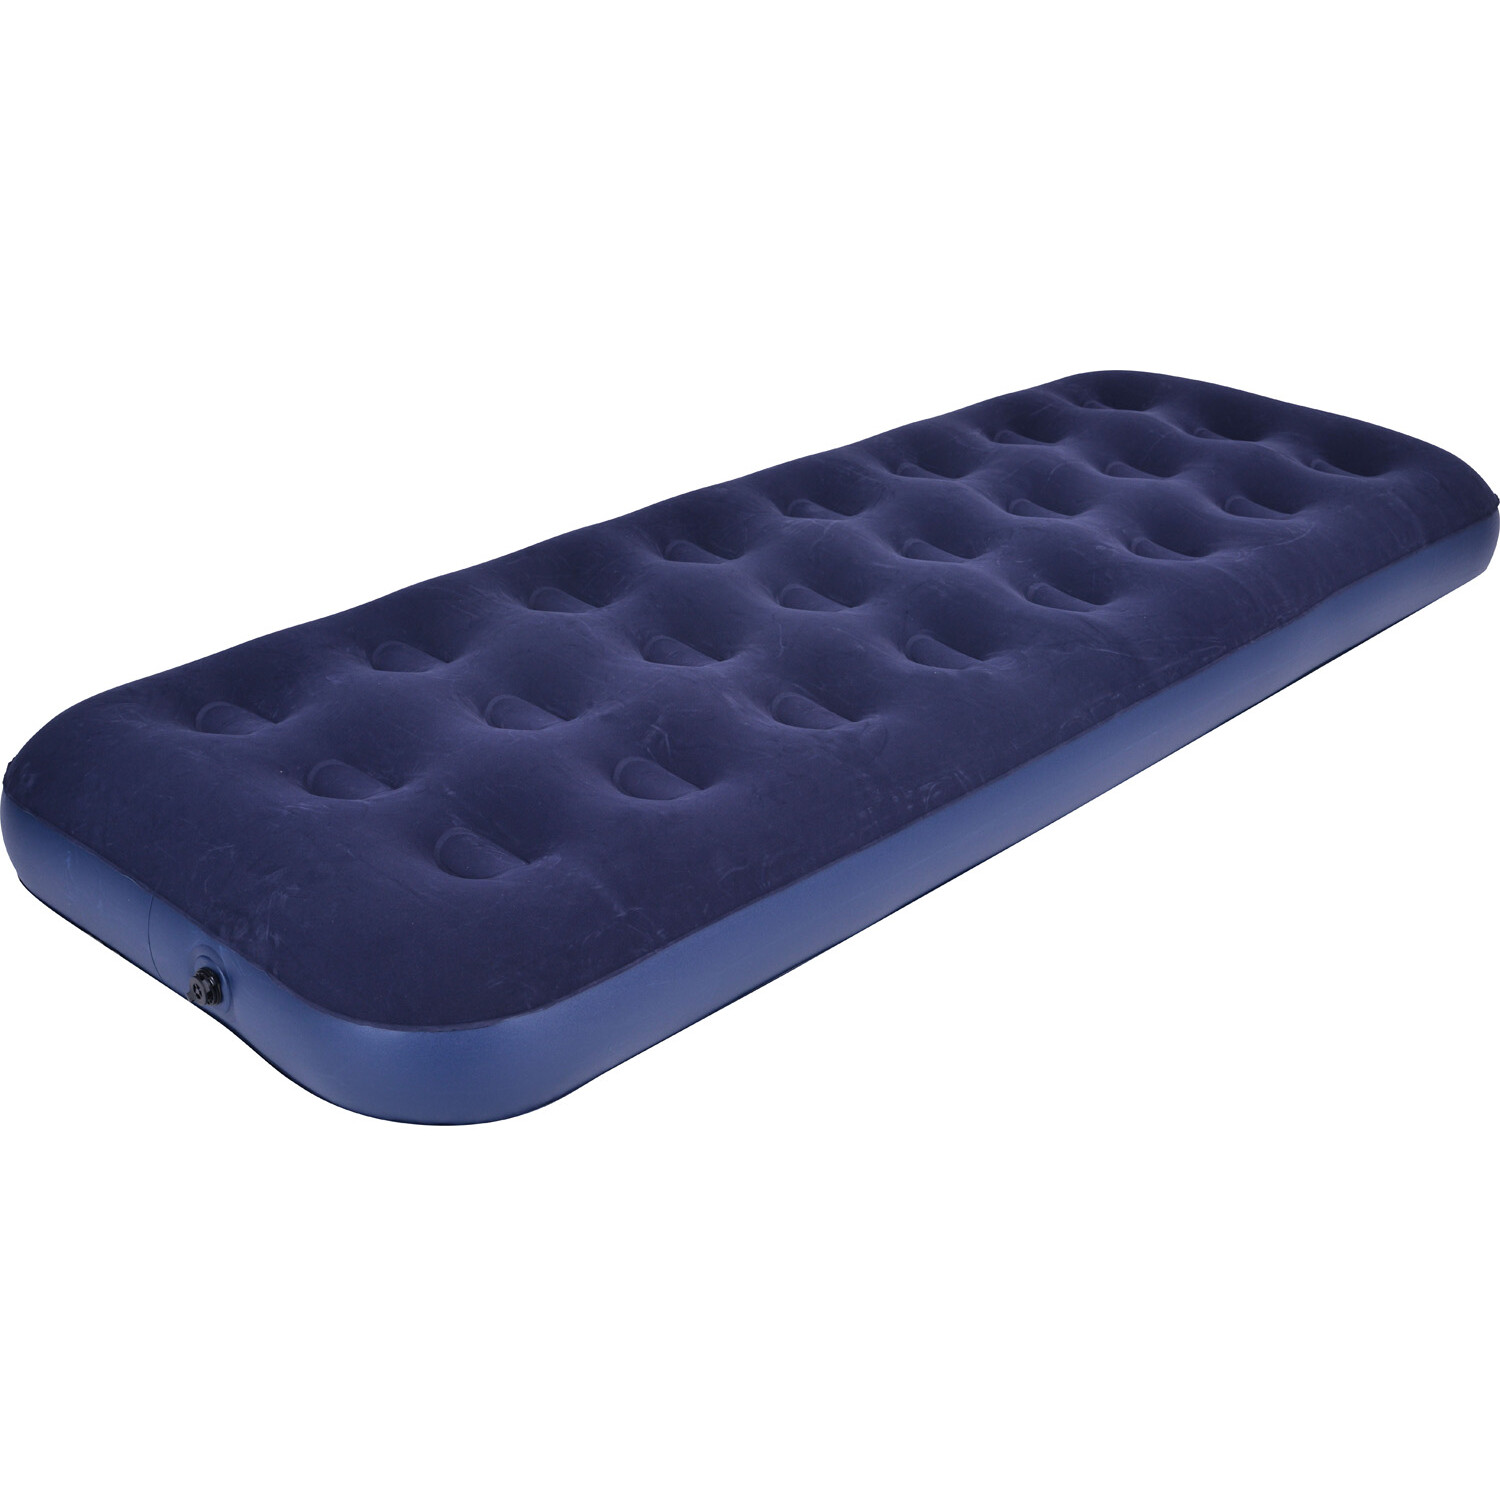 Avenli Single Air Bed Image 1